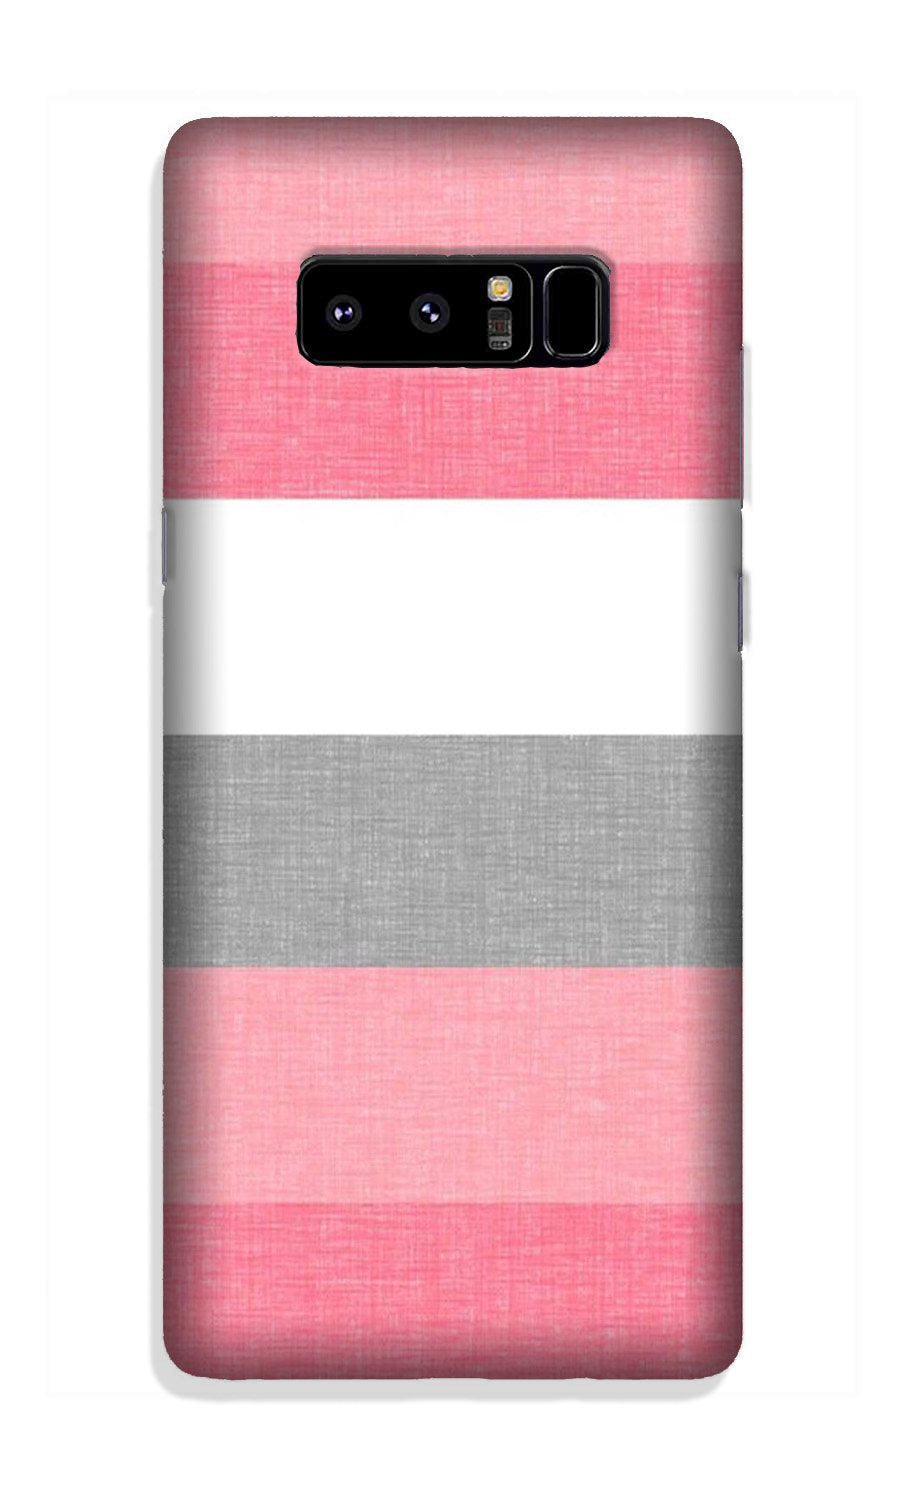 Pink white pattern Case for Galaxy Note 8